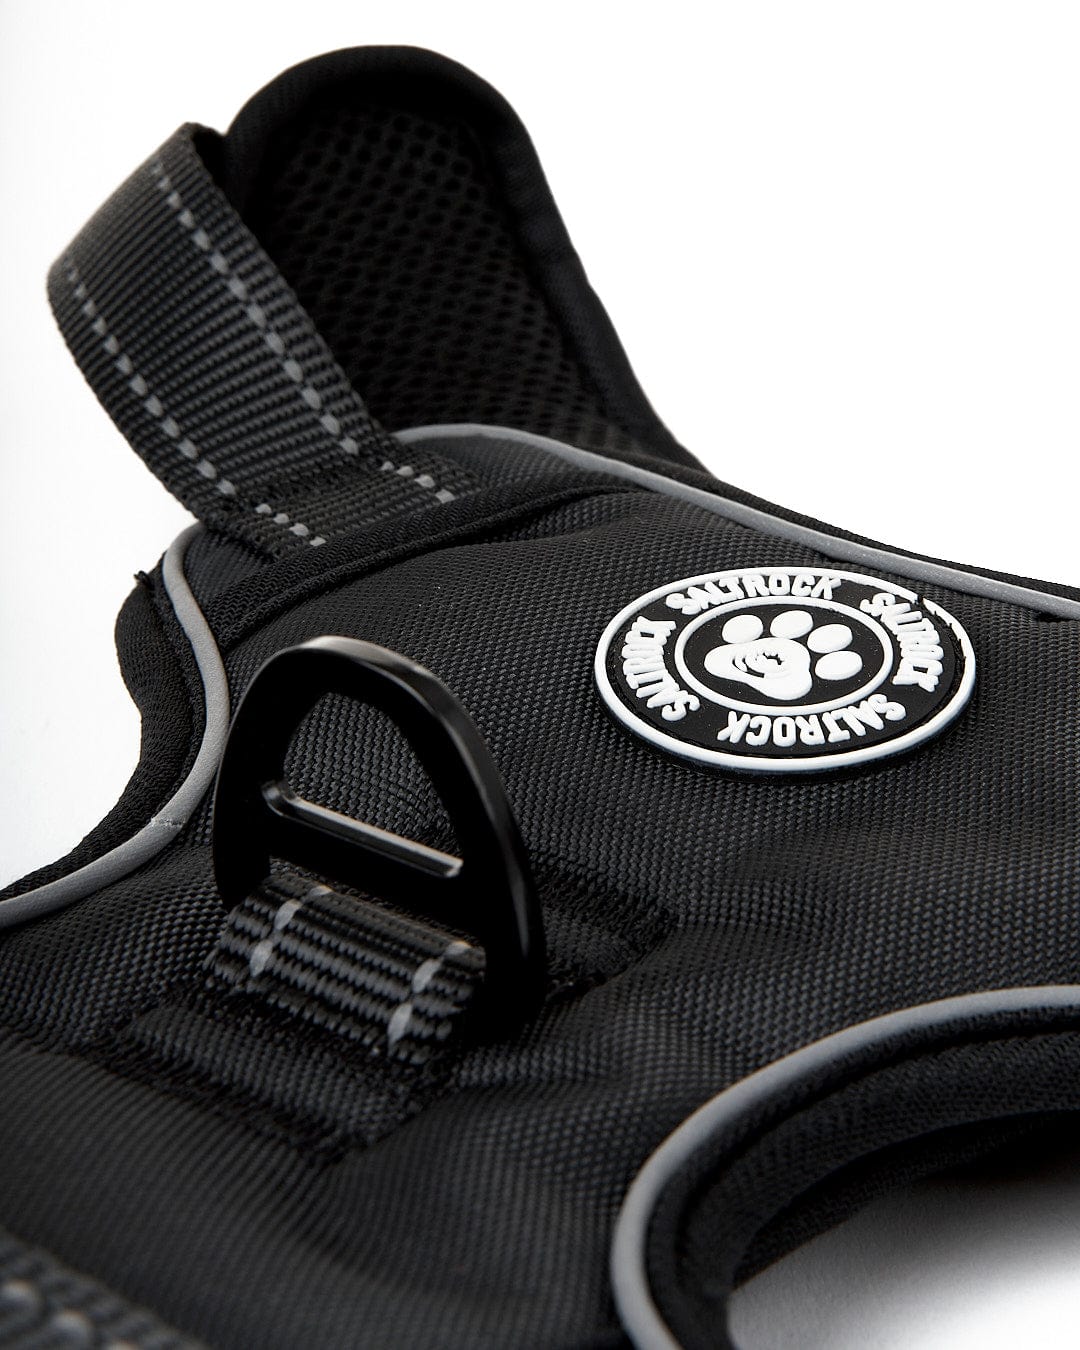 An adjustable Saltrock Pet Harness in black with a logo on it.